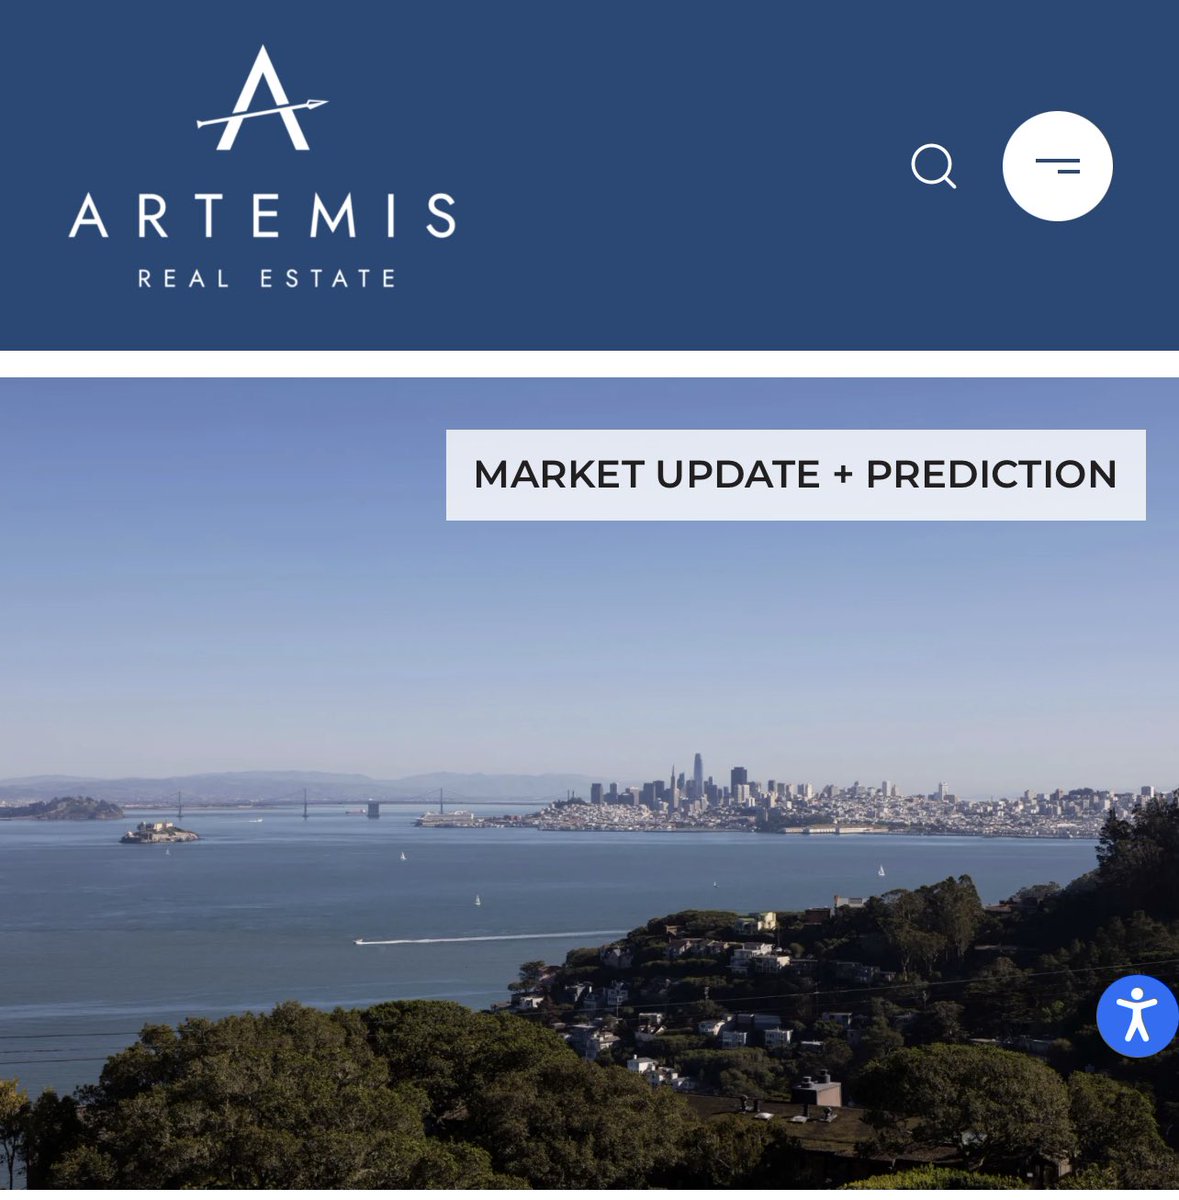 Just published our Jan/Feb market report. Take a look if you’re at all interested in #SanFranciscoRealEstate, #MarinRealEstate, #AI, and macro trends. artemisrealestate.com/blog/january-f…